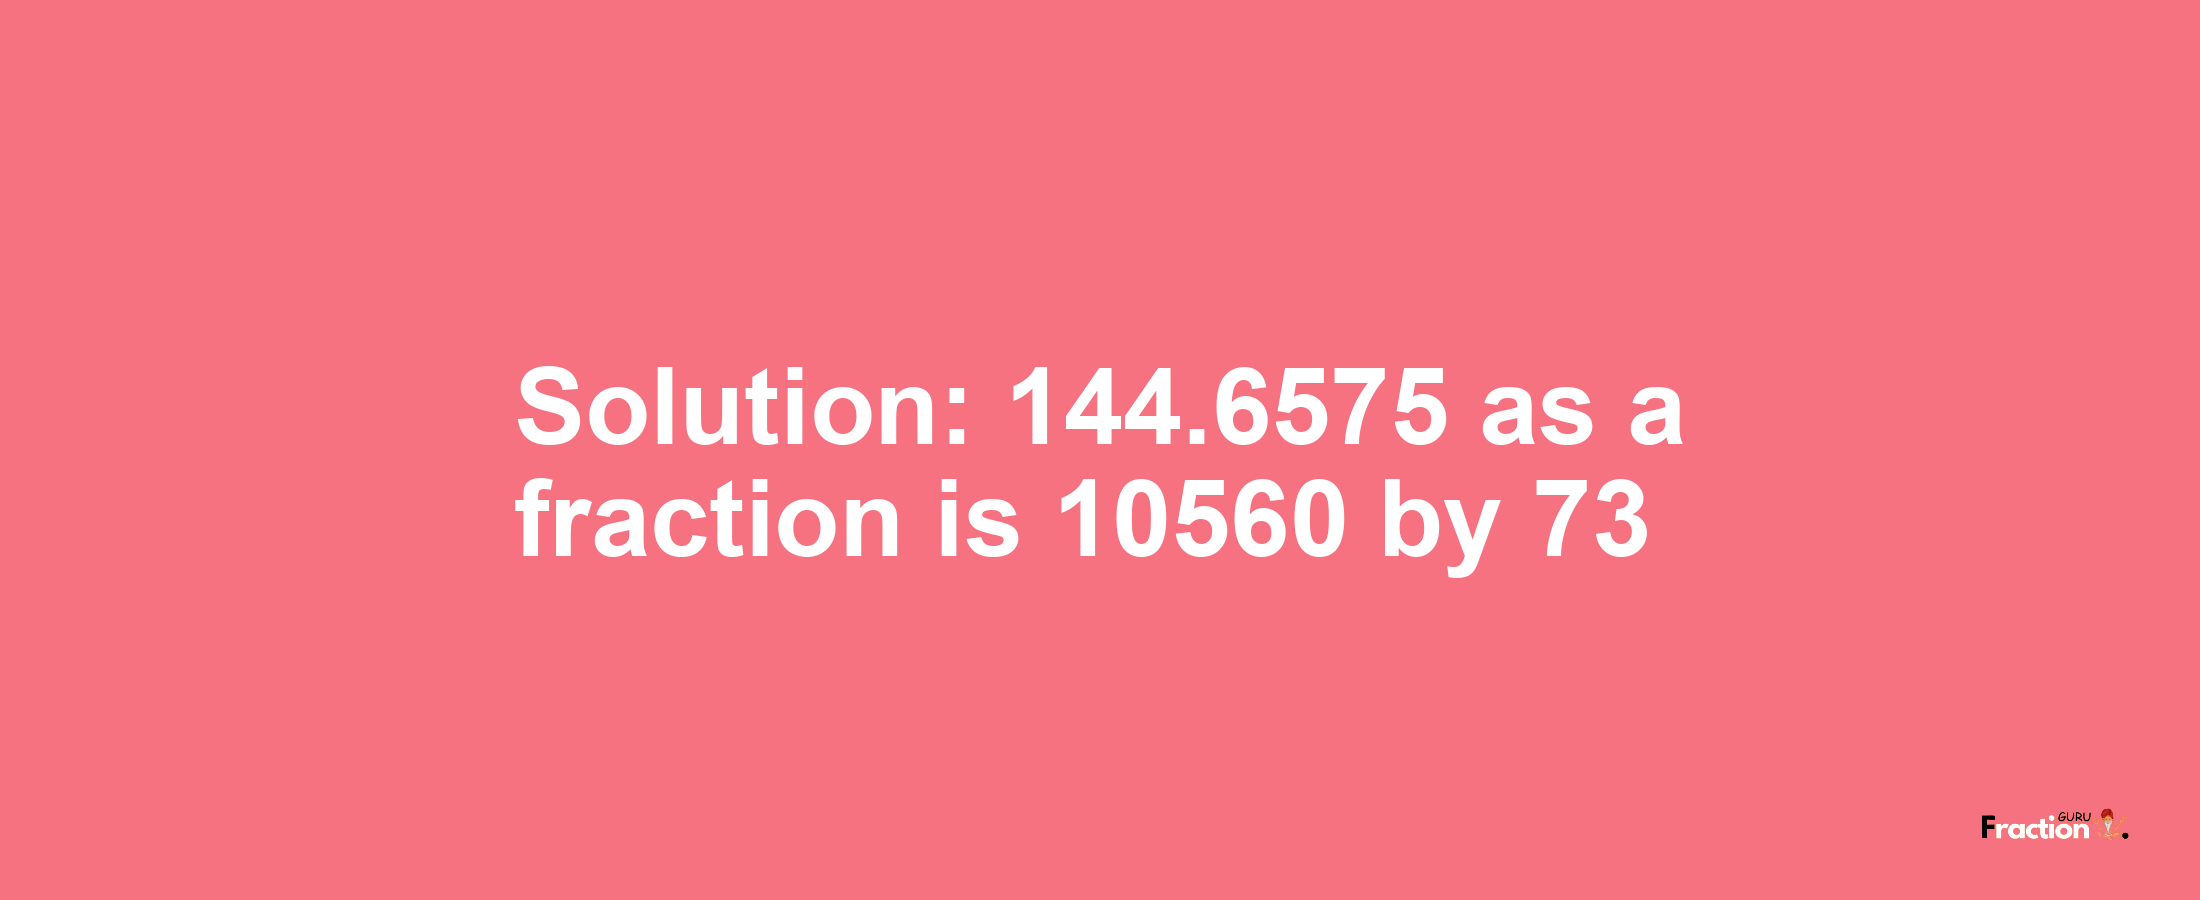 Solution:144.6575 as a fraction is 10560/73